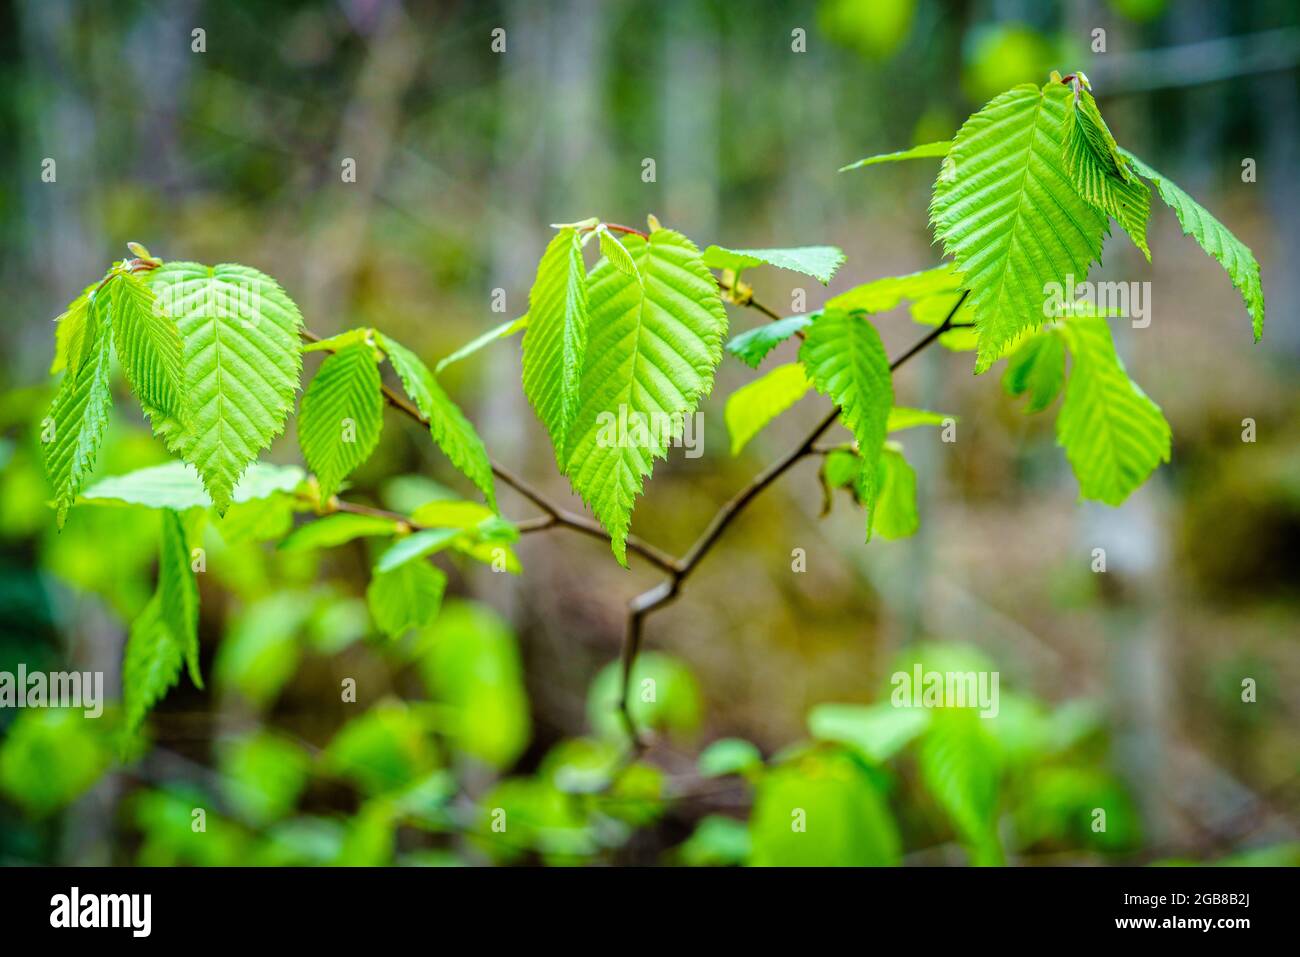 Close-up image of fresh green birch leaves in spring Stock Photo